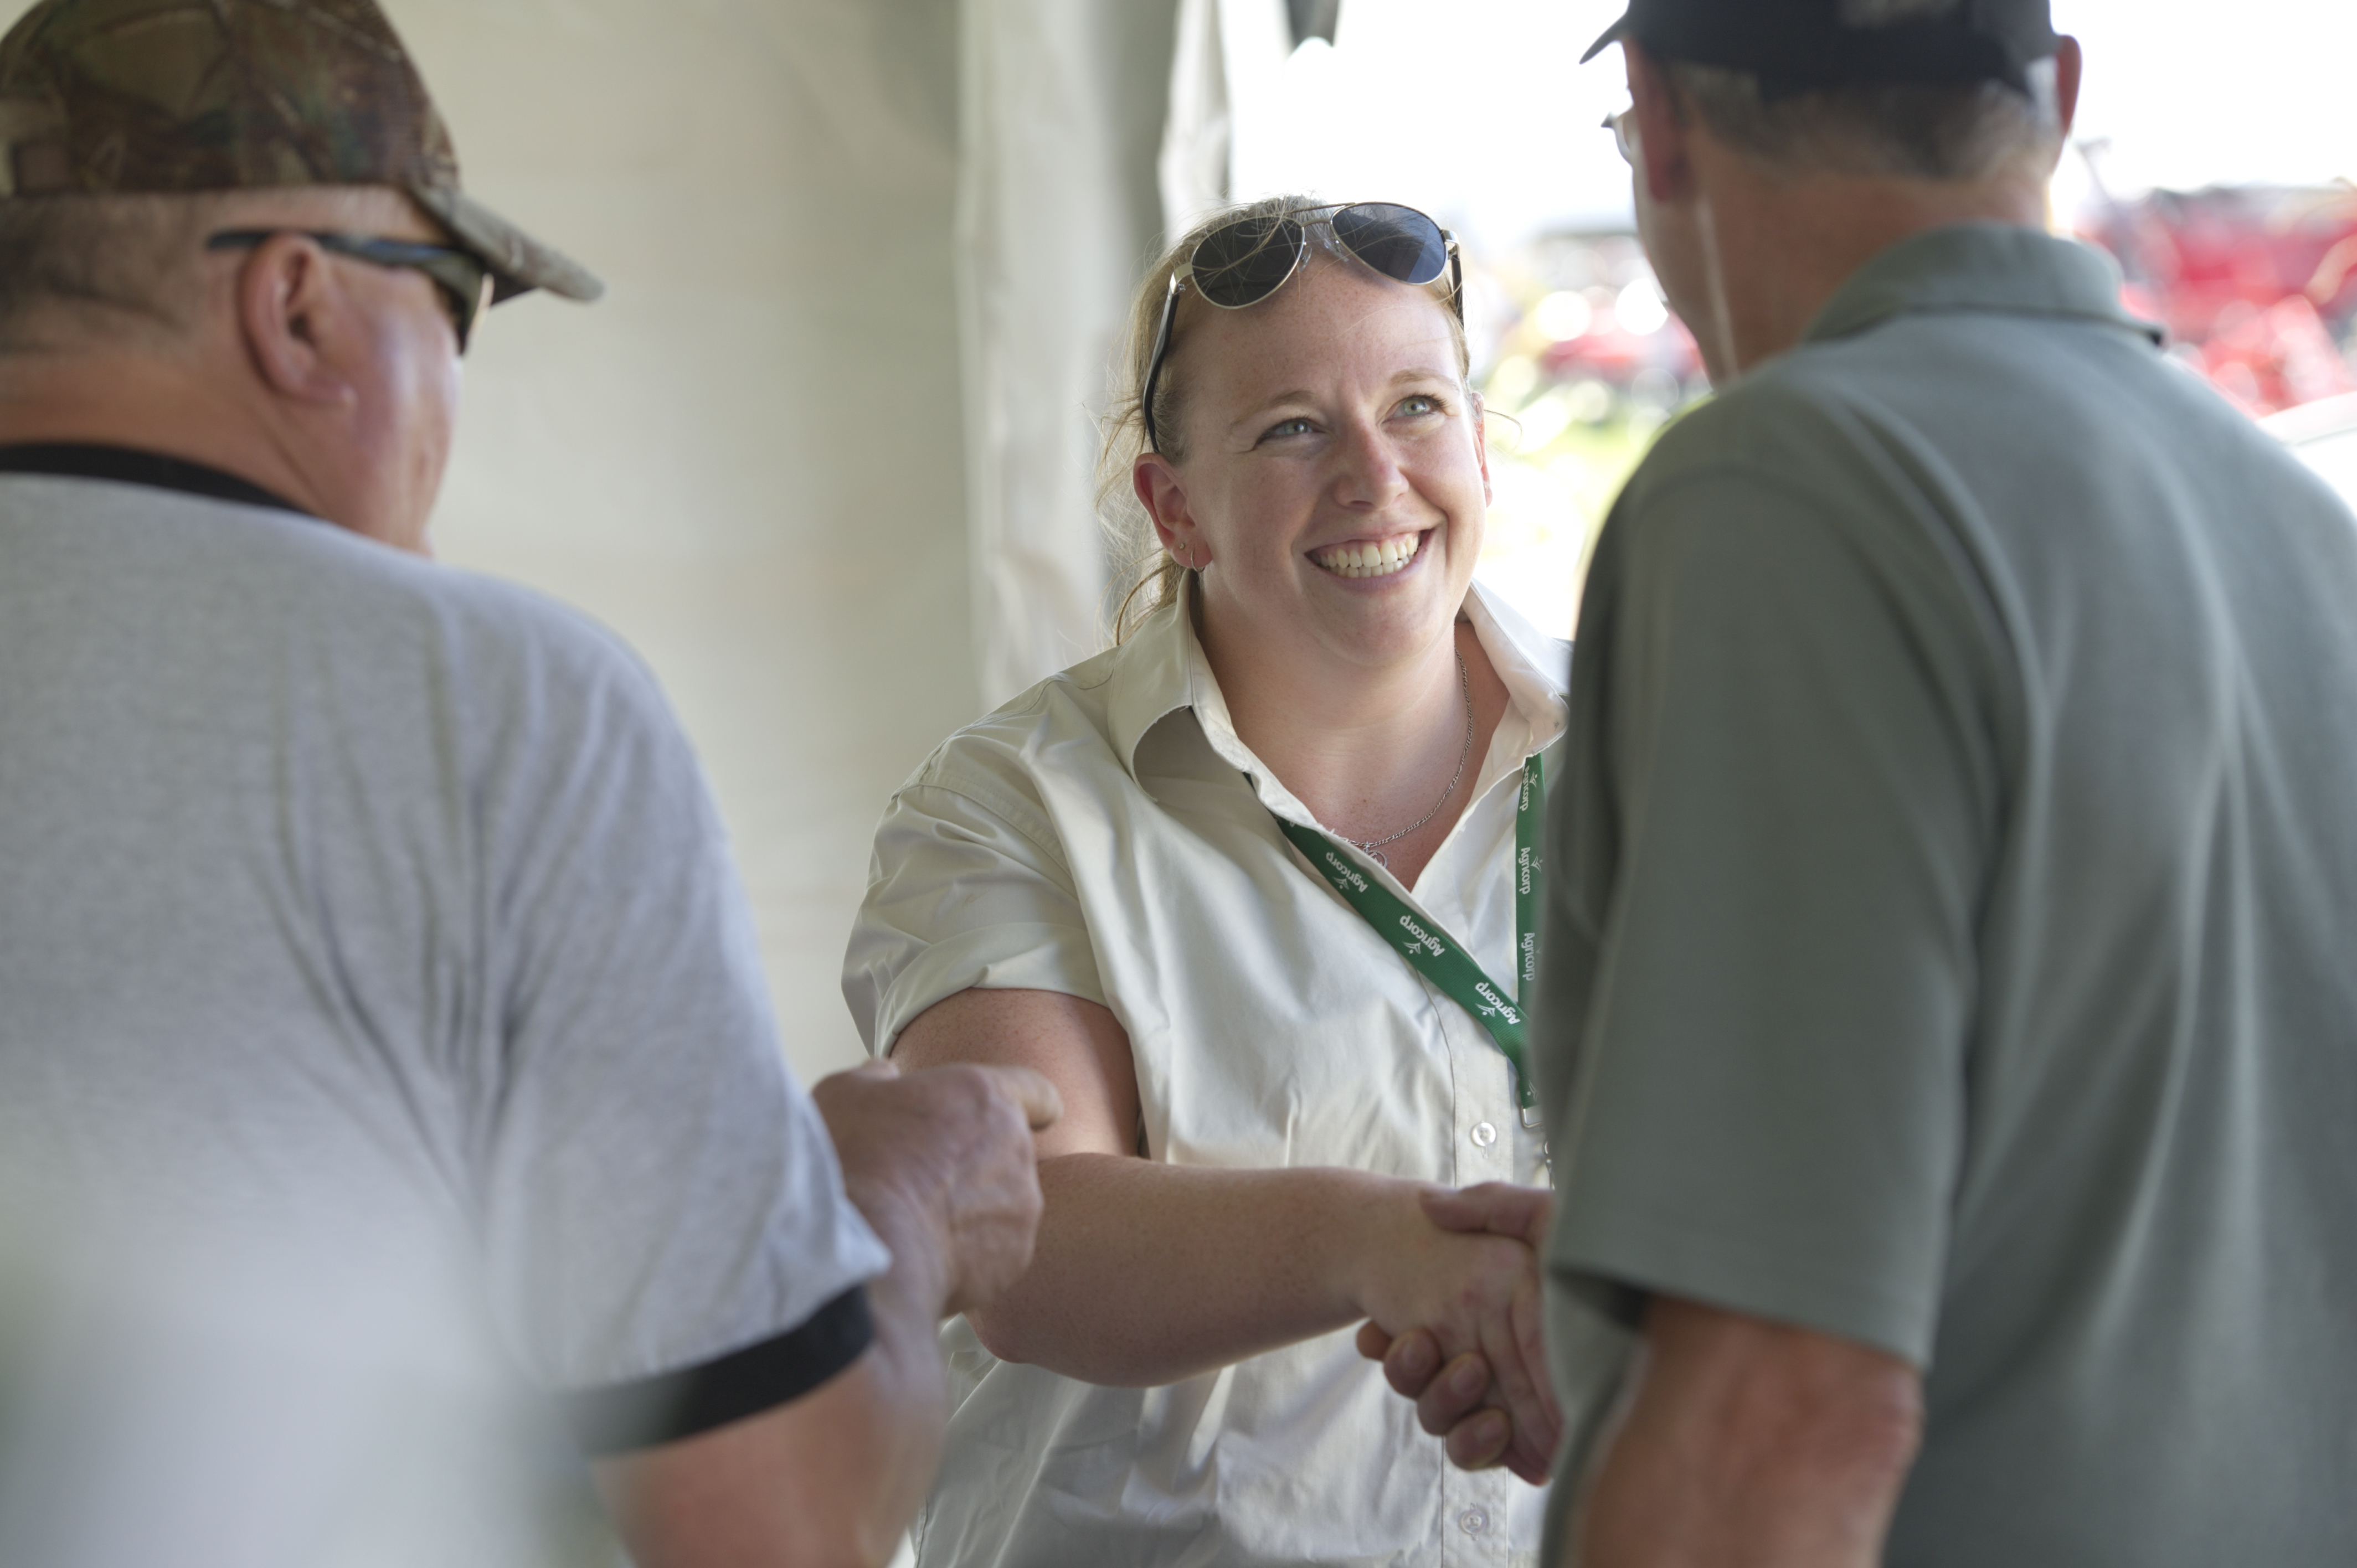 An Agricorp staff member shakes hands with a producer at a farm show.